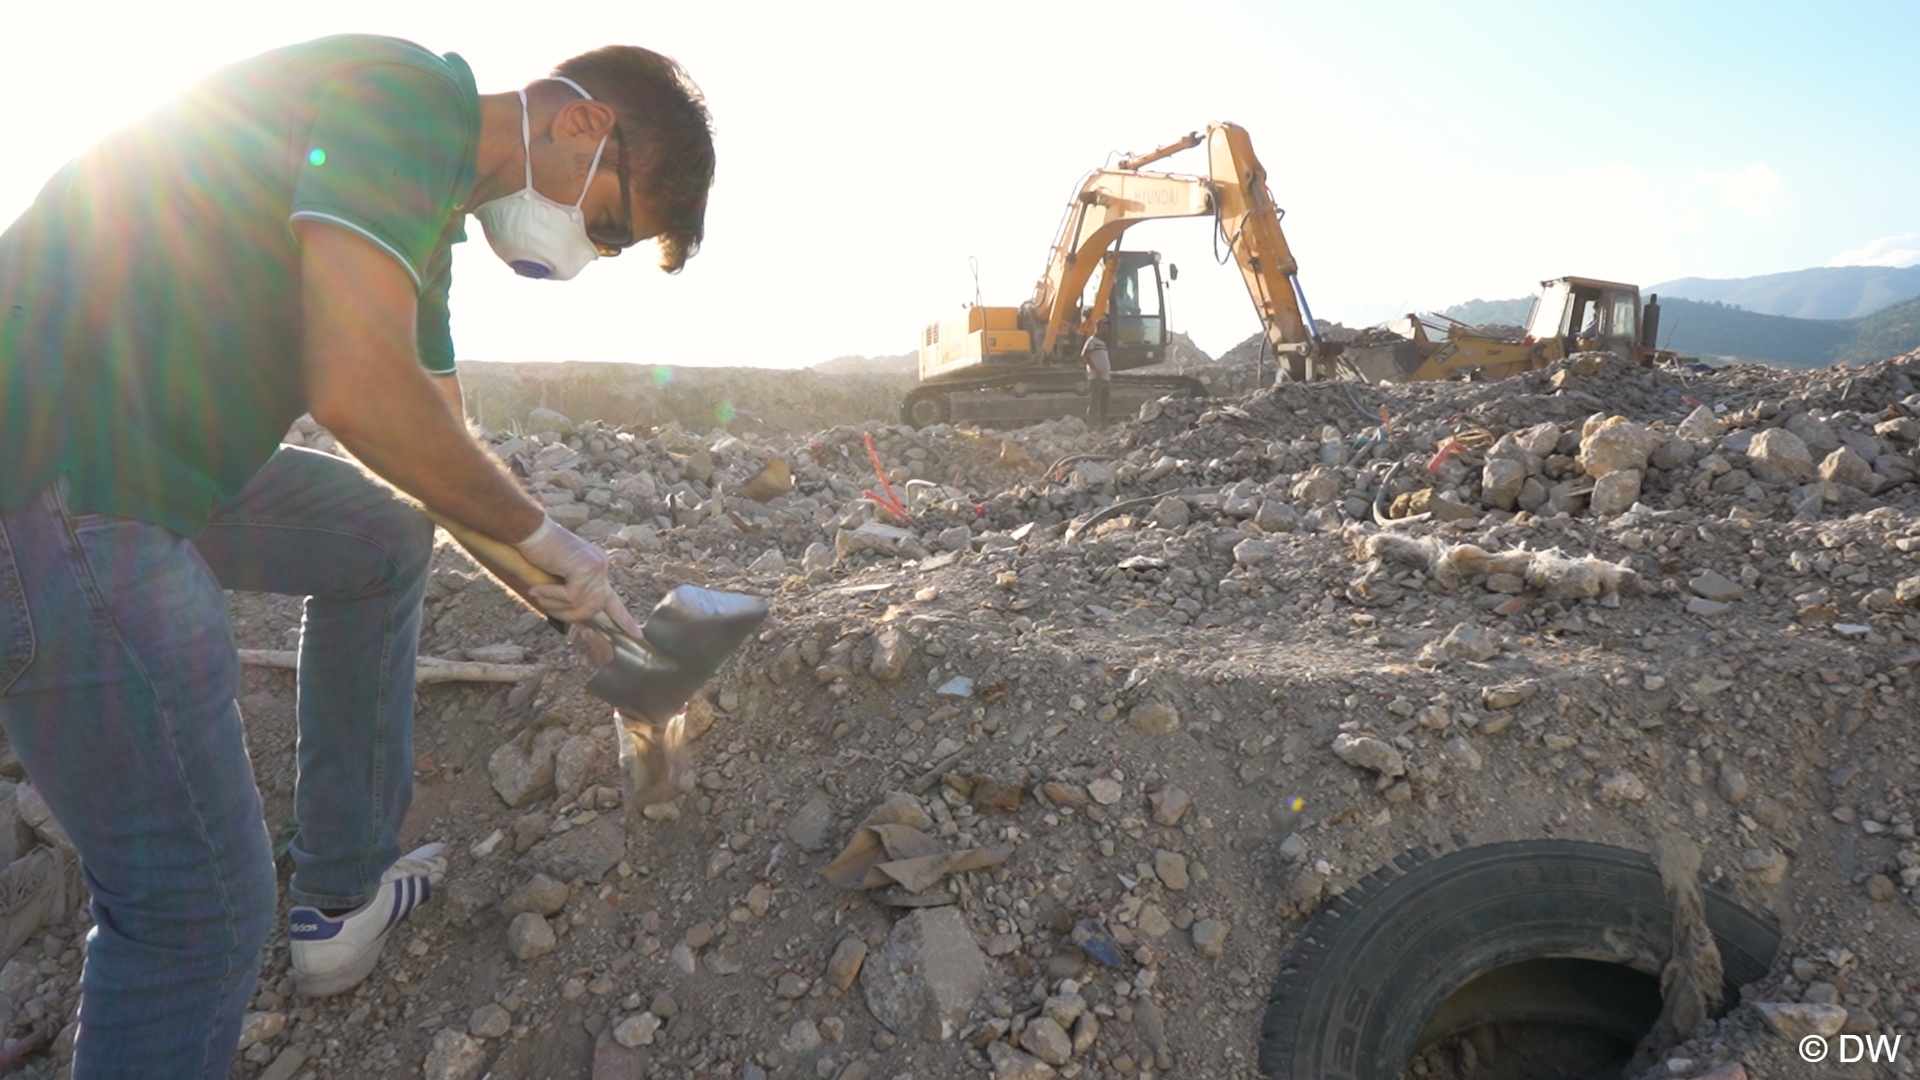 Utku Firat wears a mask as he uses a small shovel to fill dust into a small plastic bag on a debris site in Hatay, southern Turkey (image: DW)